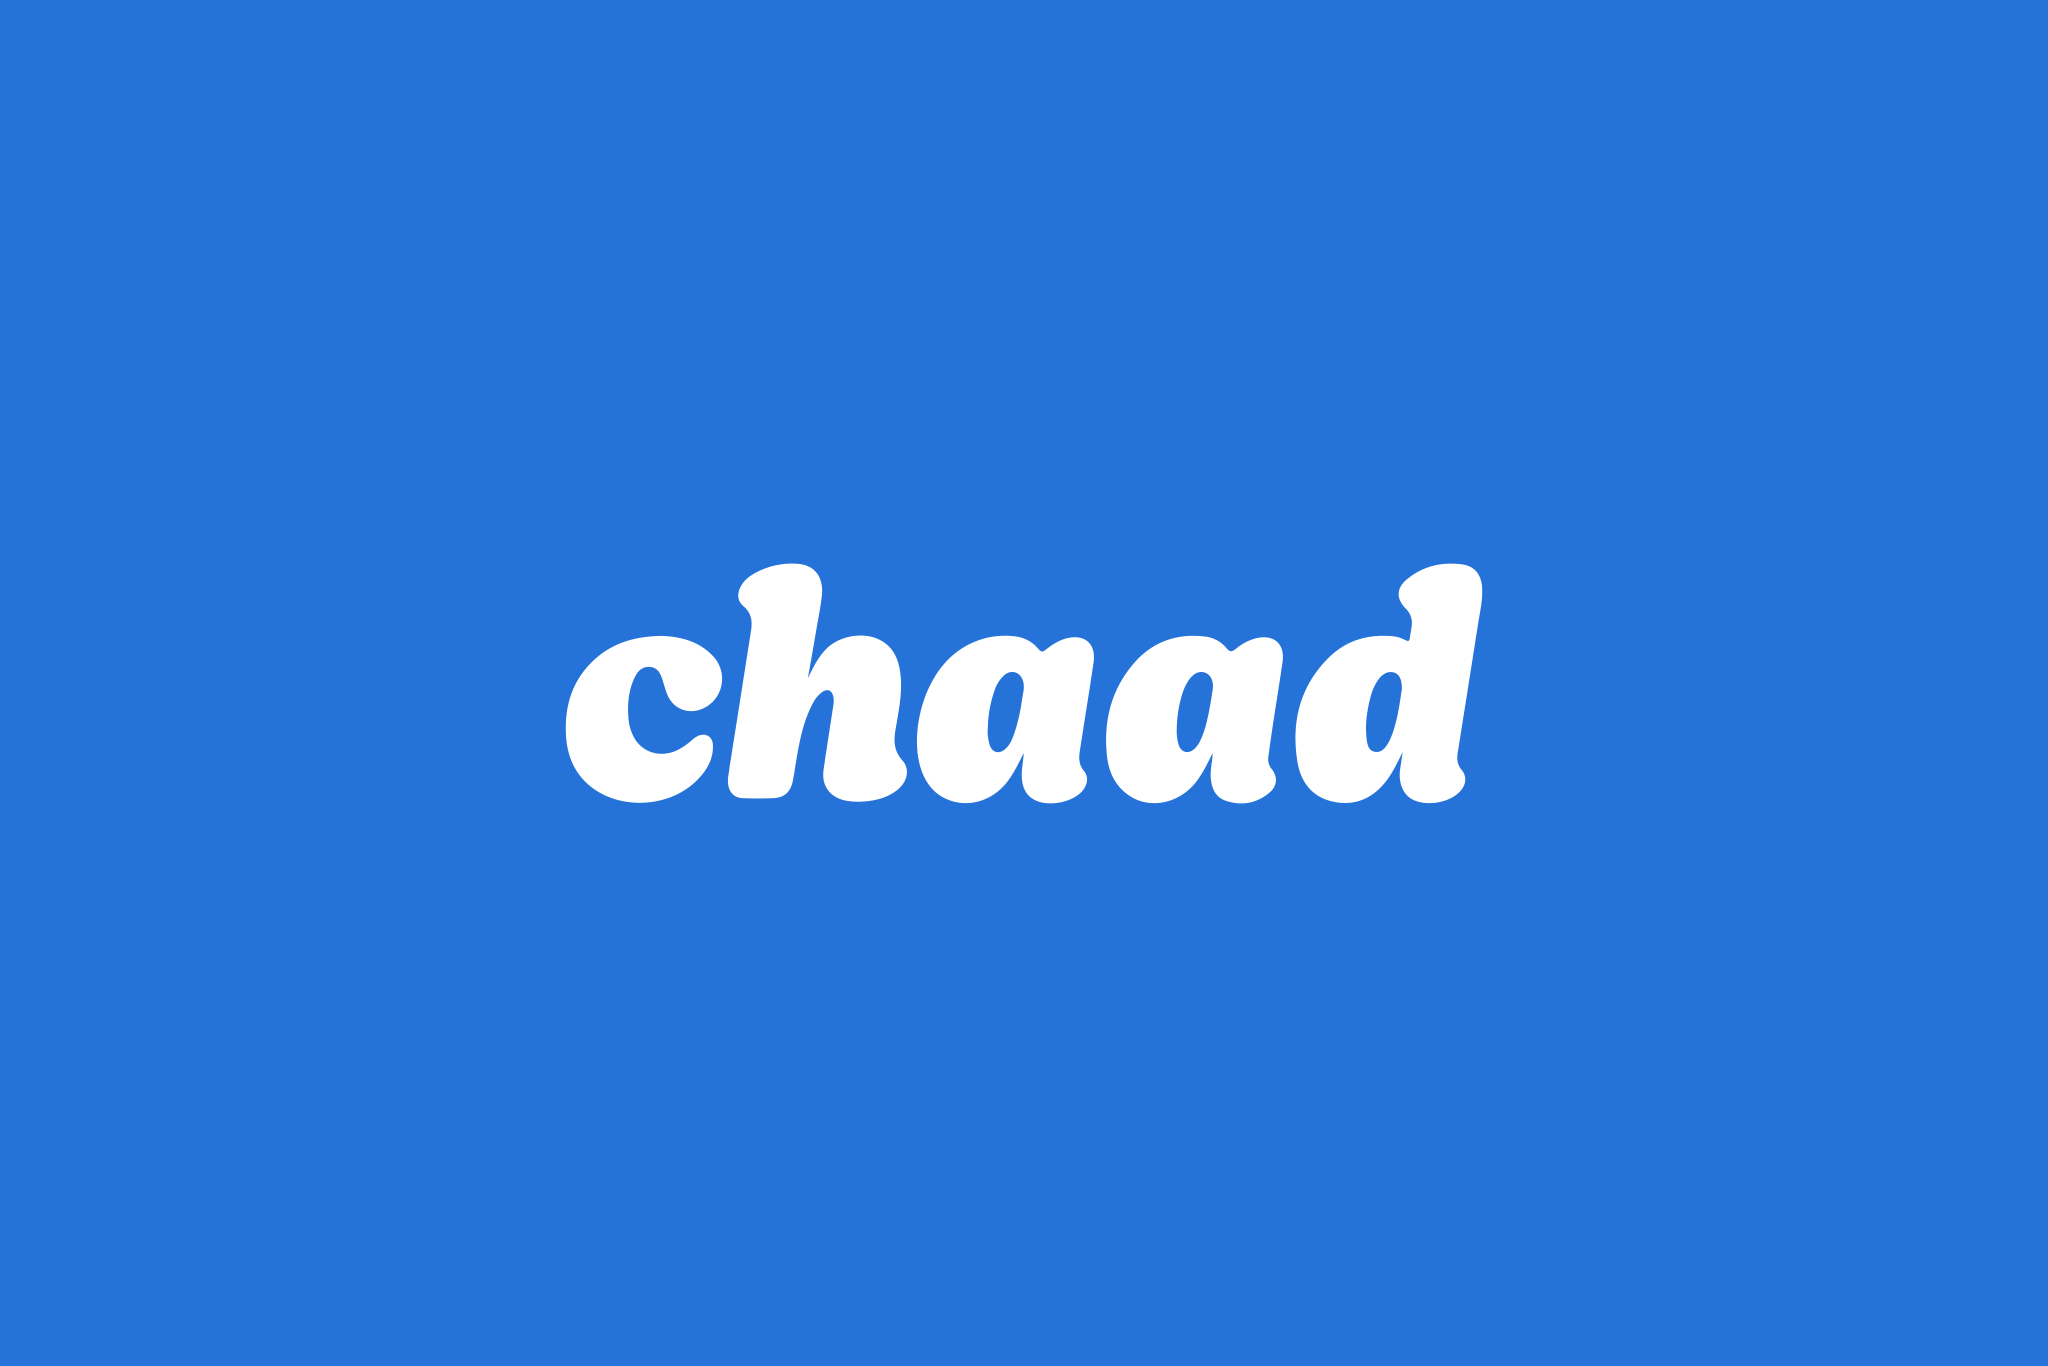 chaad_cover